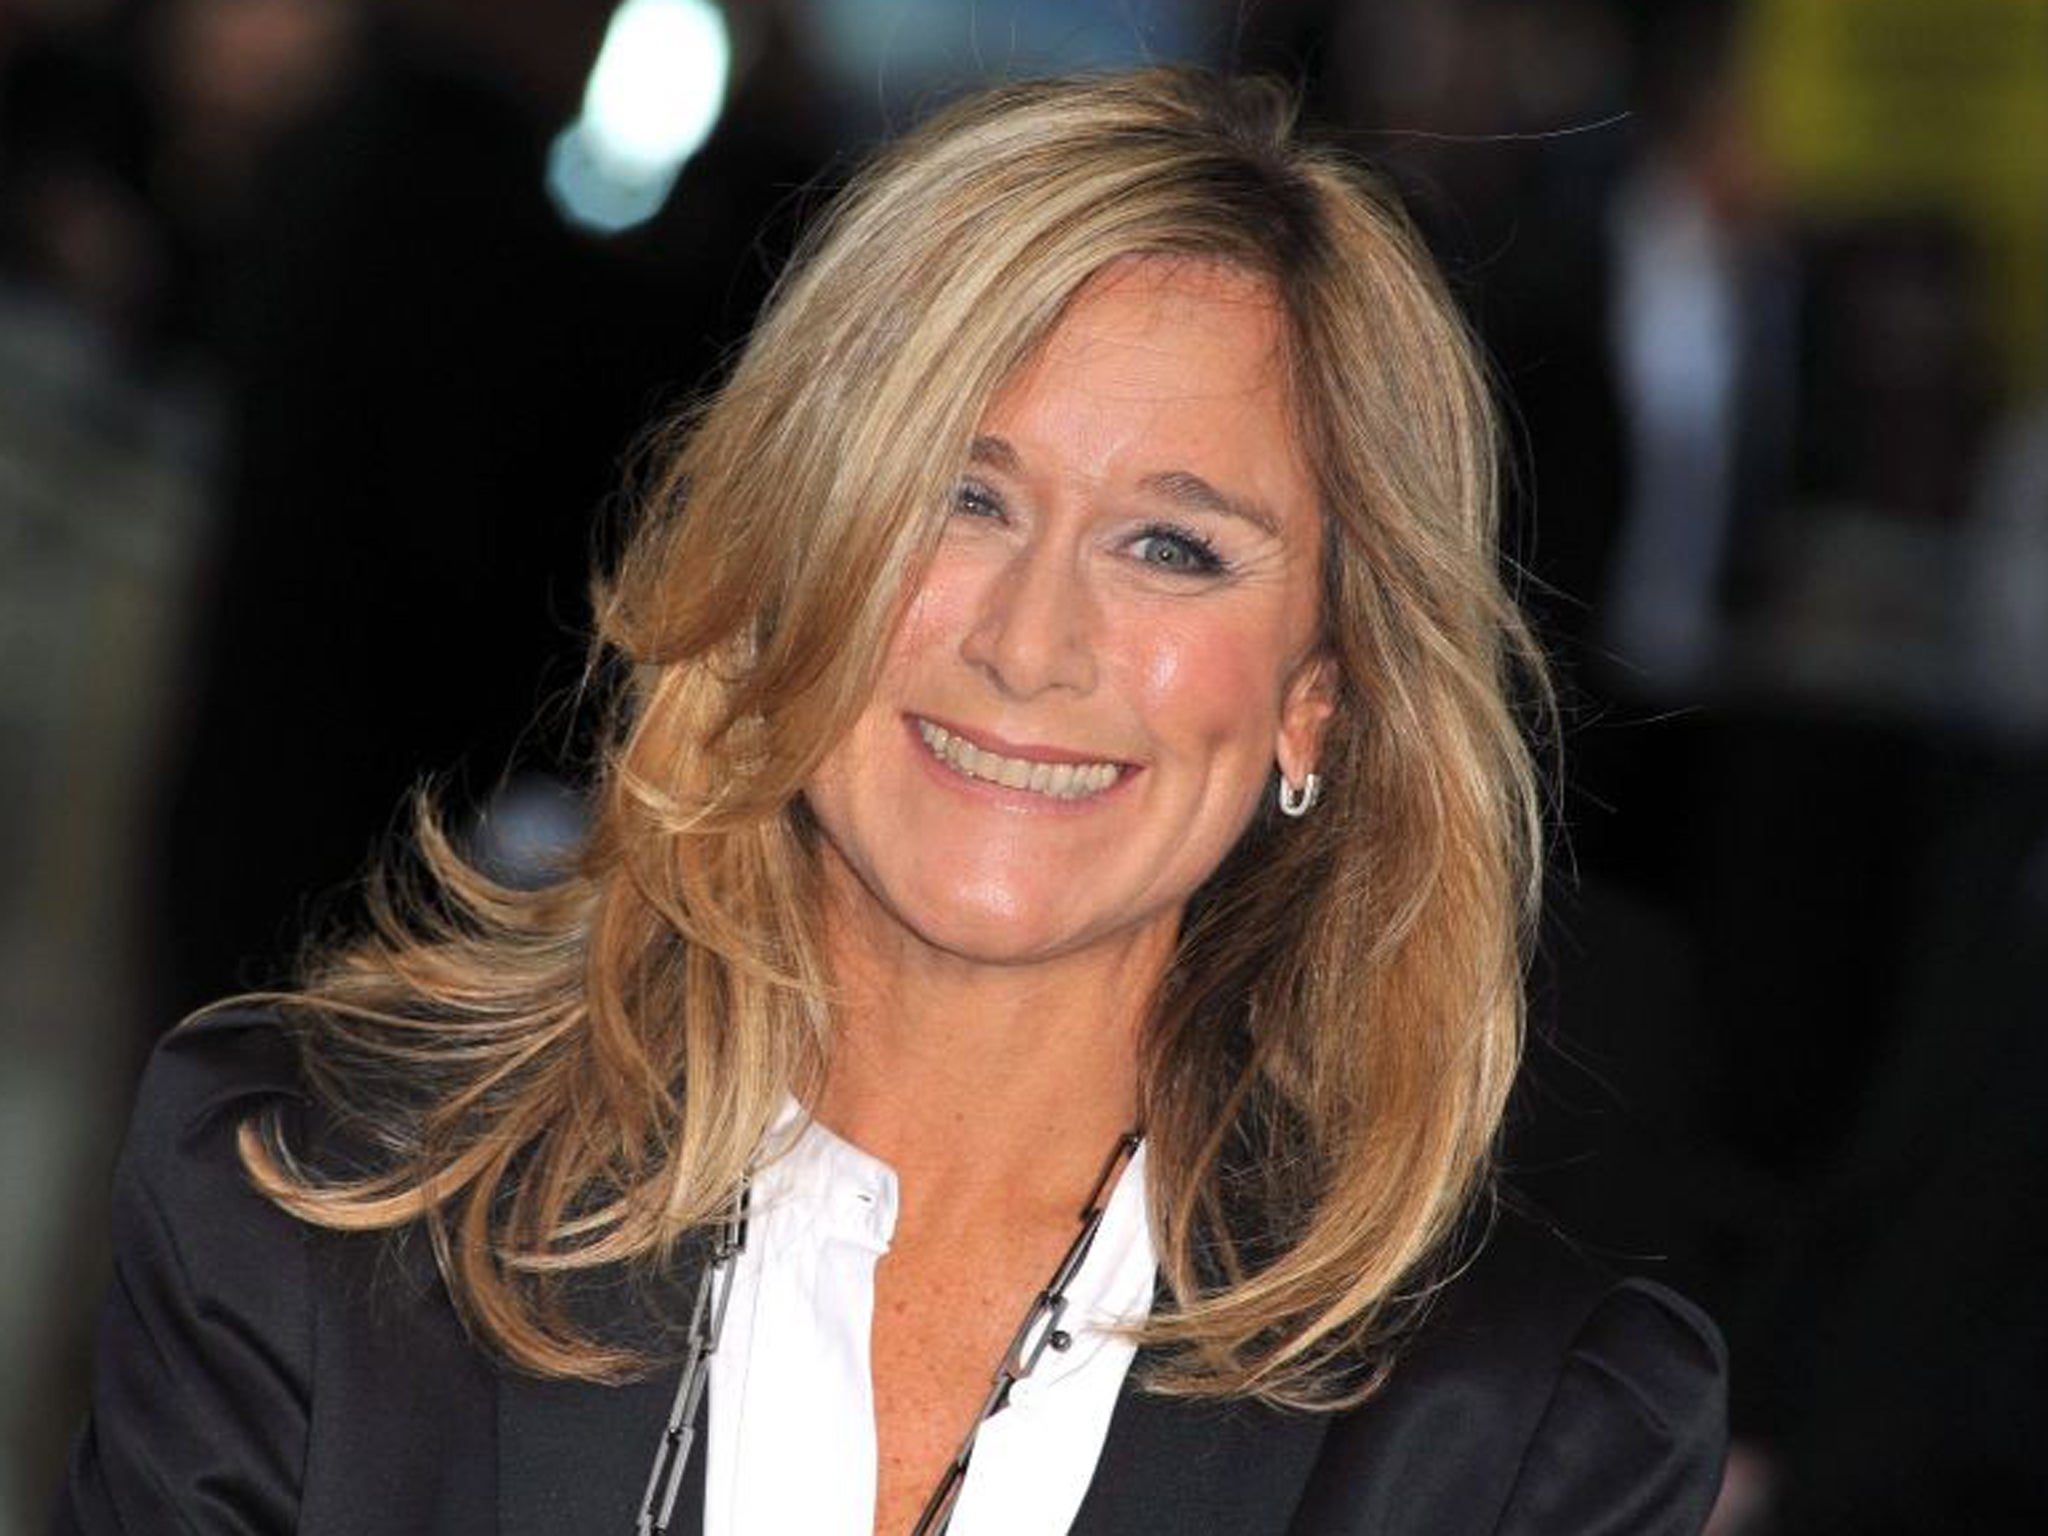 Burberry CEO Angela Ahrendts today announced she is to leave the luxury goods brand to join US tech giant Apple as vice president for retail and online stores.